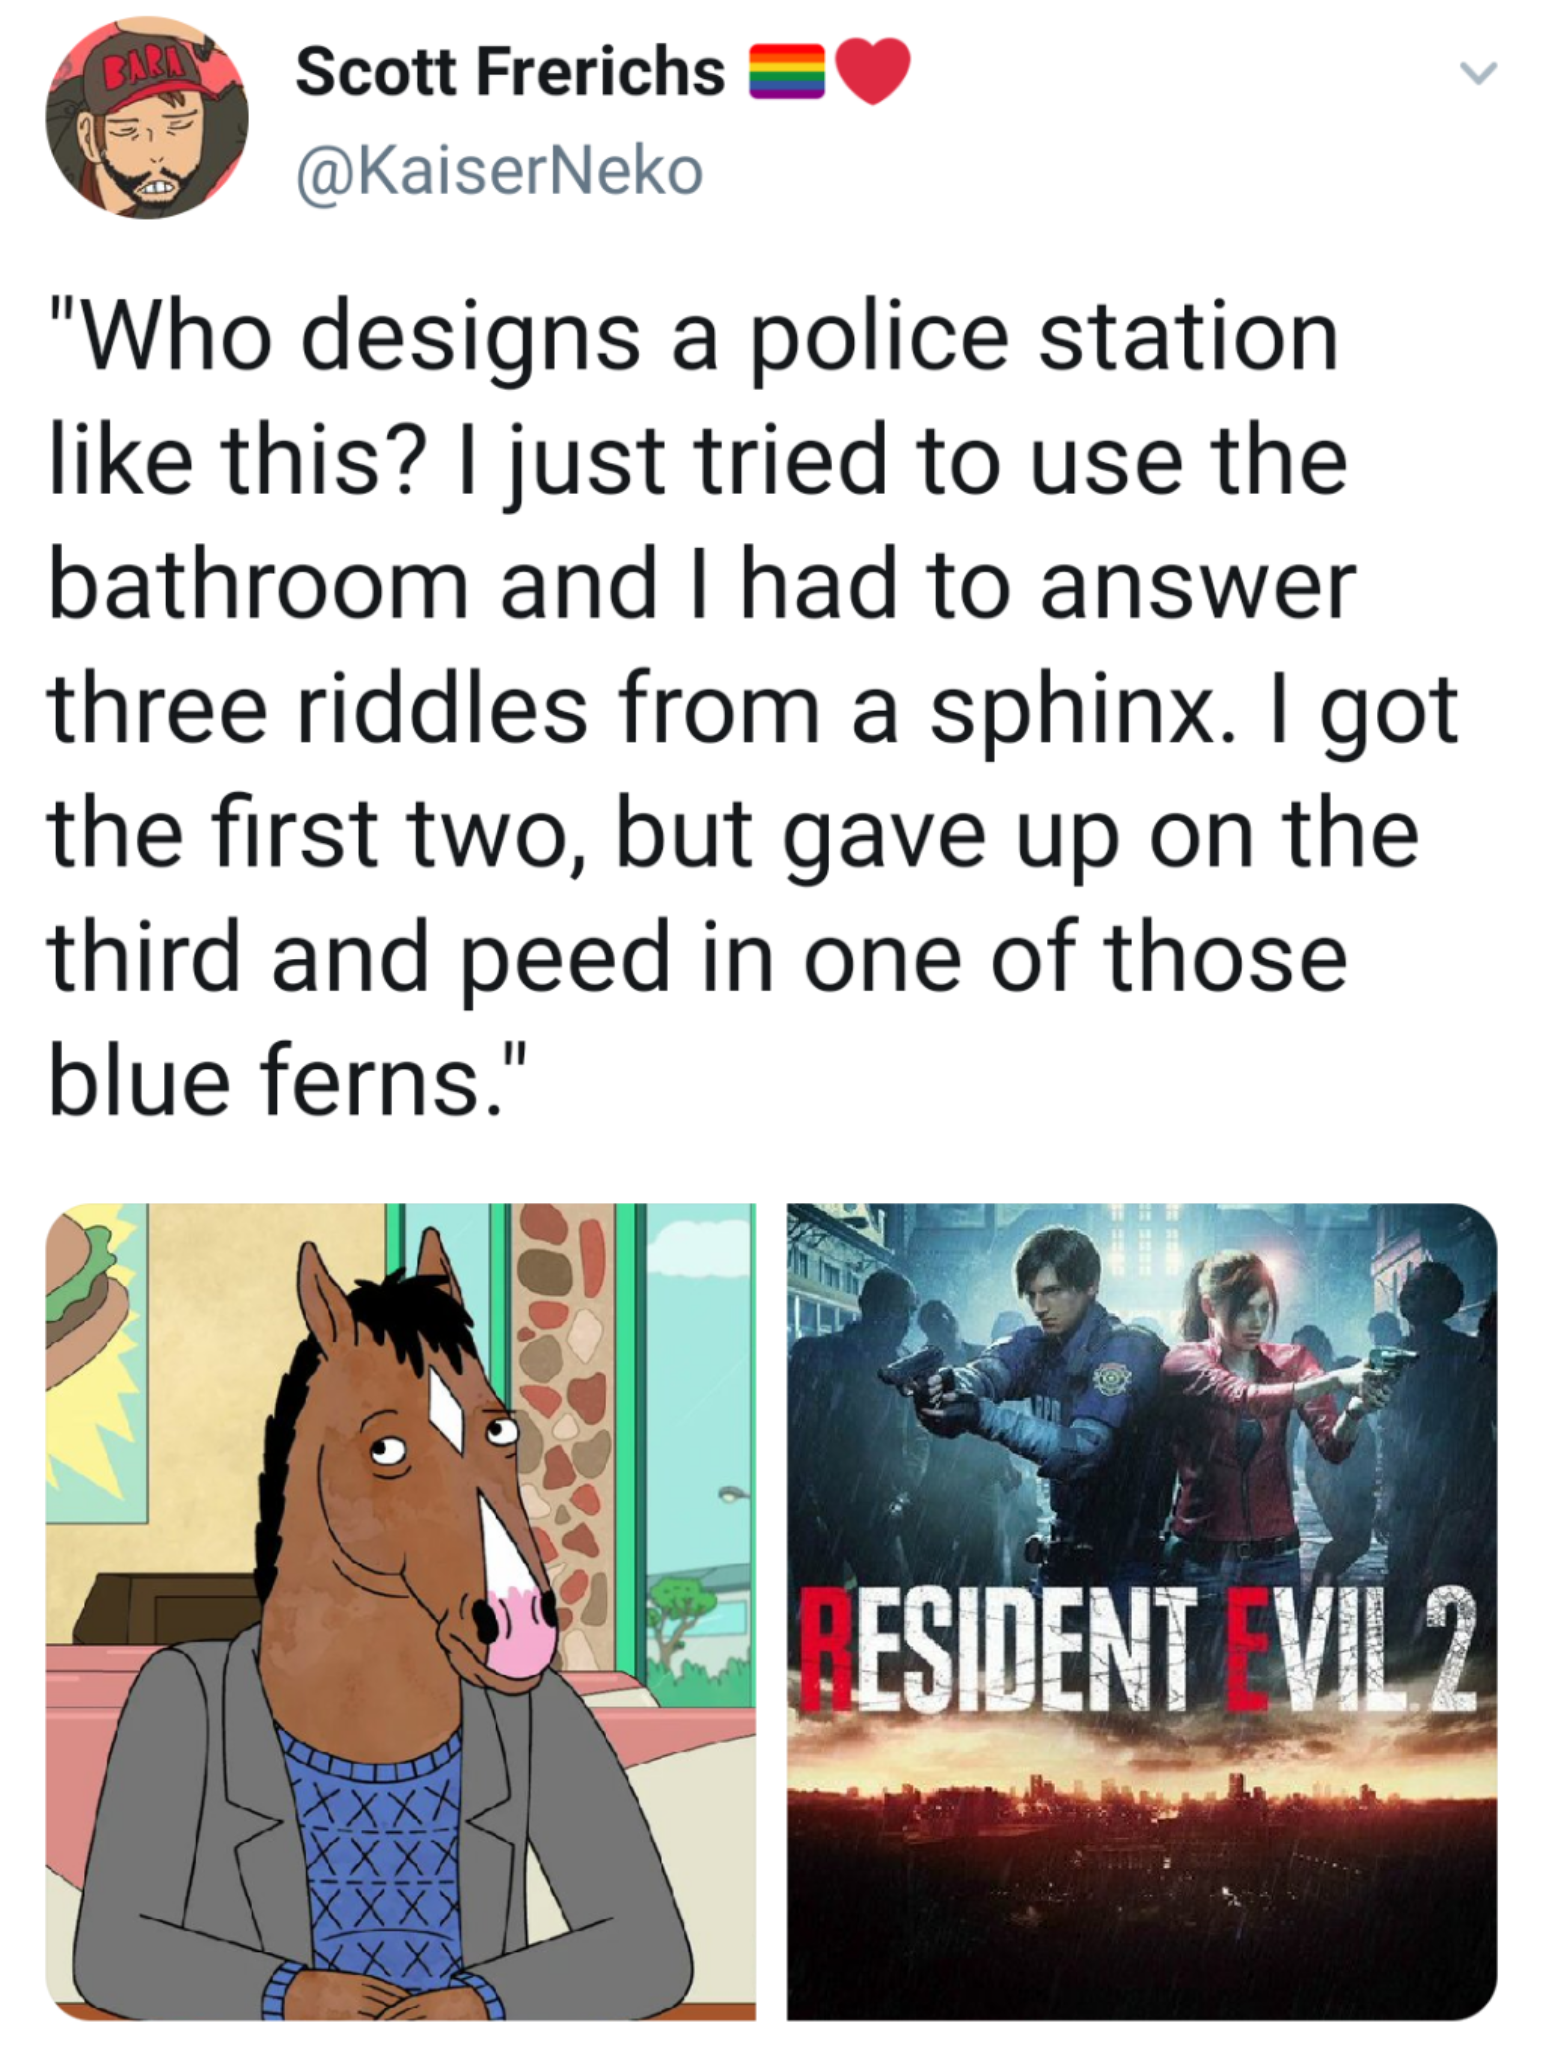 horse - Scott Frerichs "Who designs a police station this? I just tried to use the bathroom and I had to answer three riddles from a sphinx. I got the first two, but gave up on the third and peed in one of those blue ferns." Esident VIL2